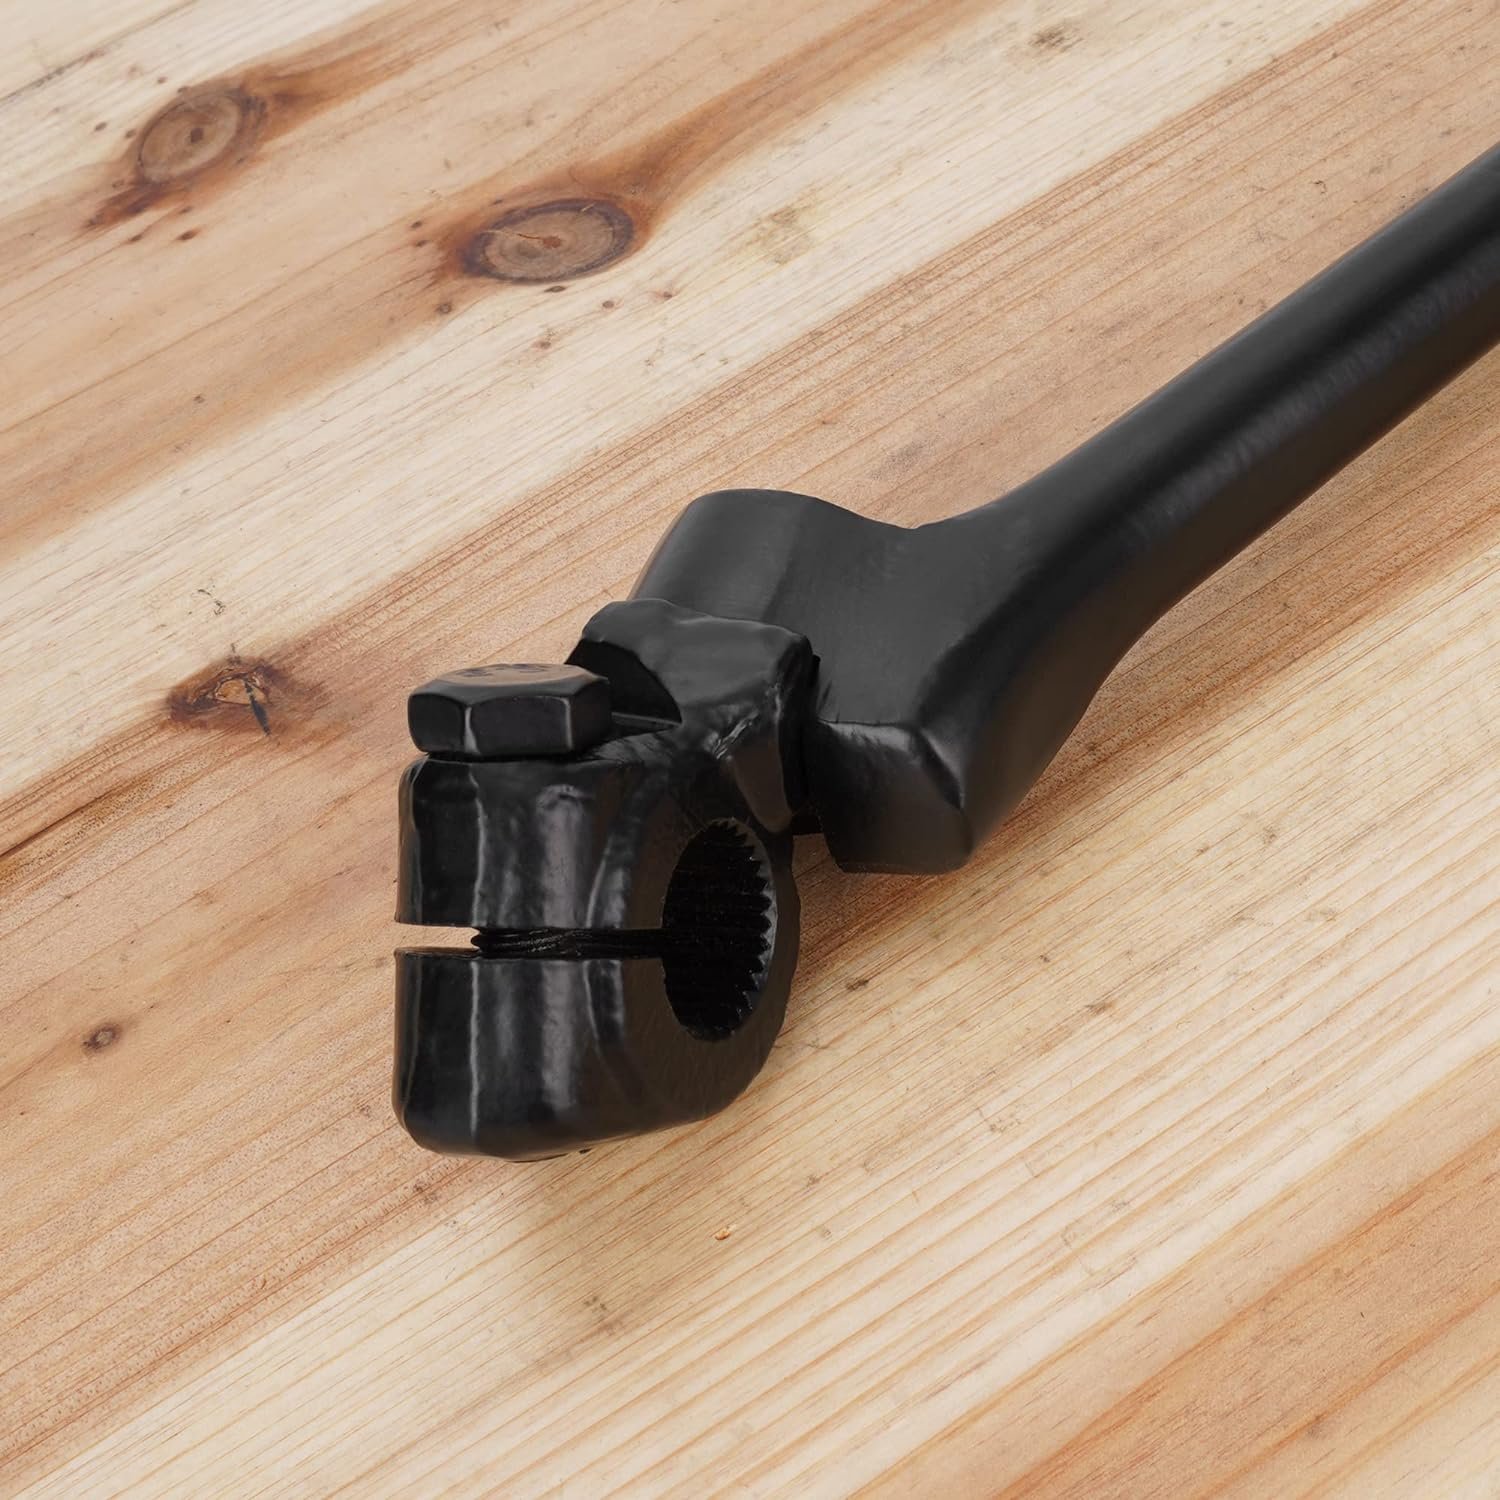 13mm Kick Starter Pedal Lever Review